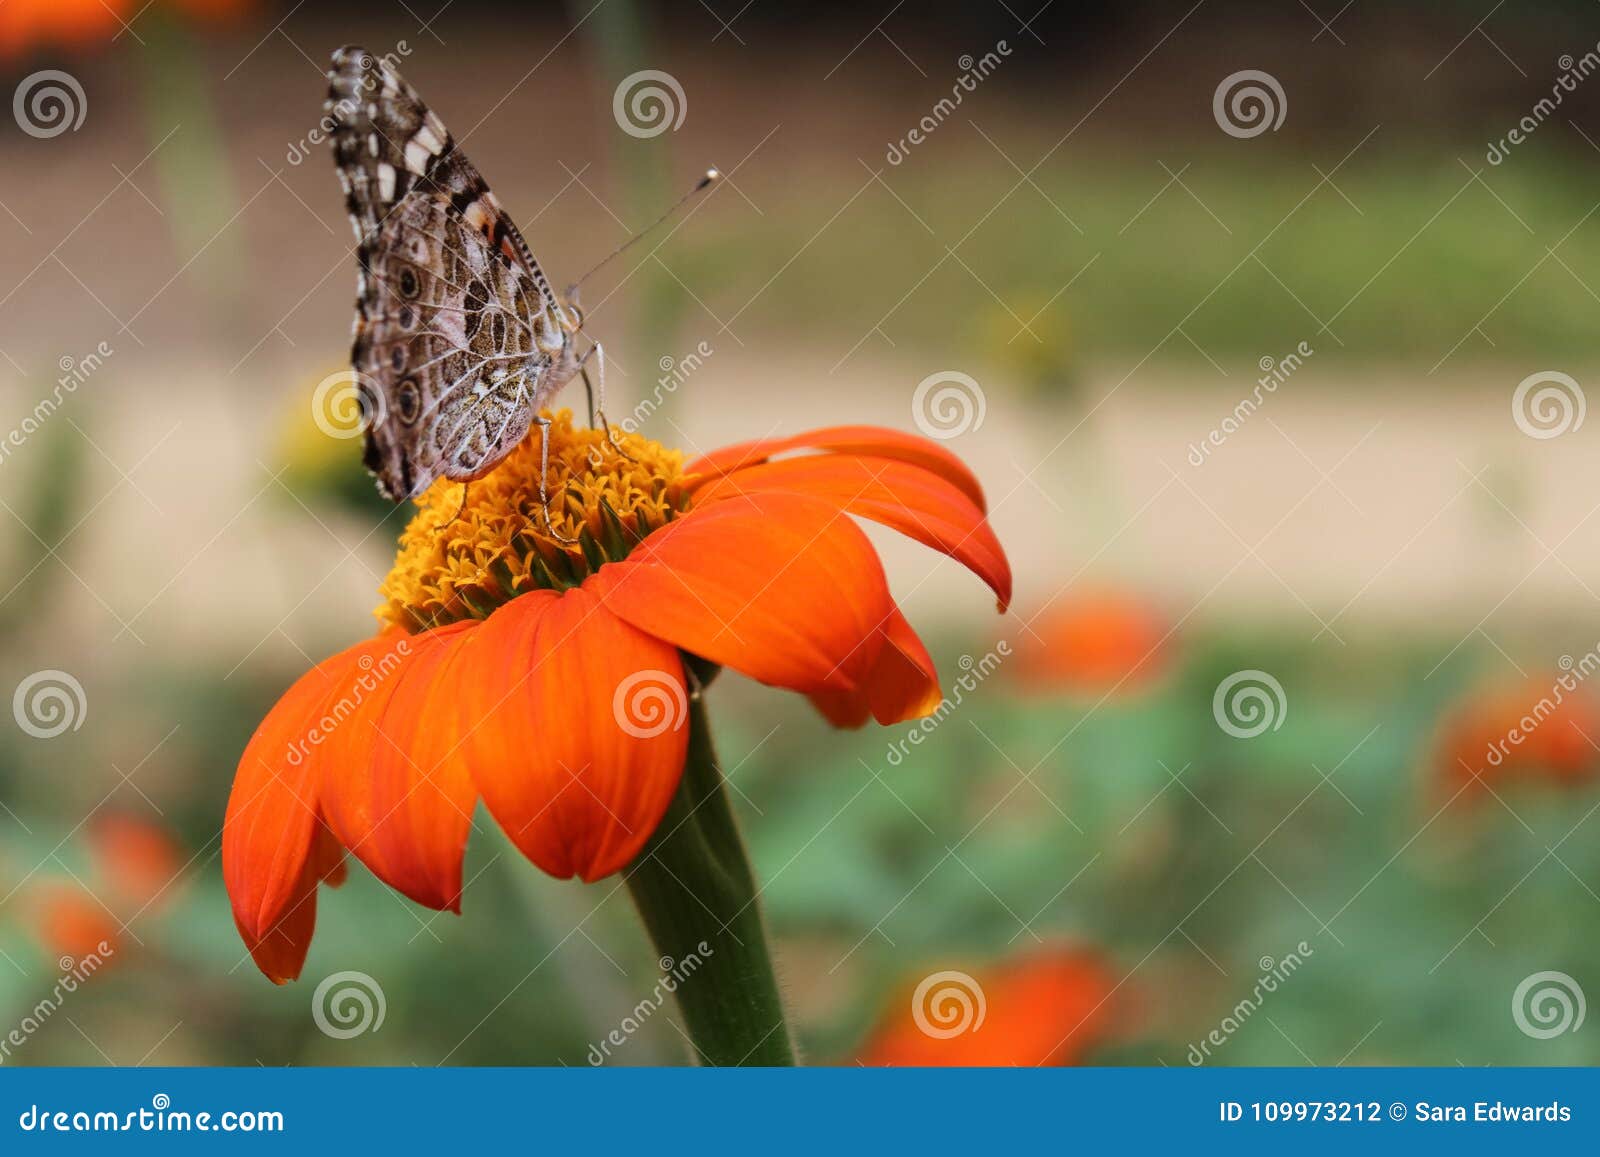 beautiful butterfly perched on top of an bright orange clavel de muerto - or mexican sunflower - in a garden